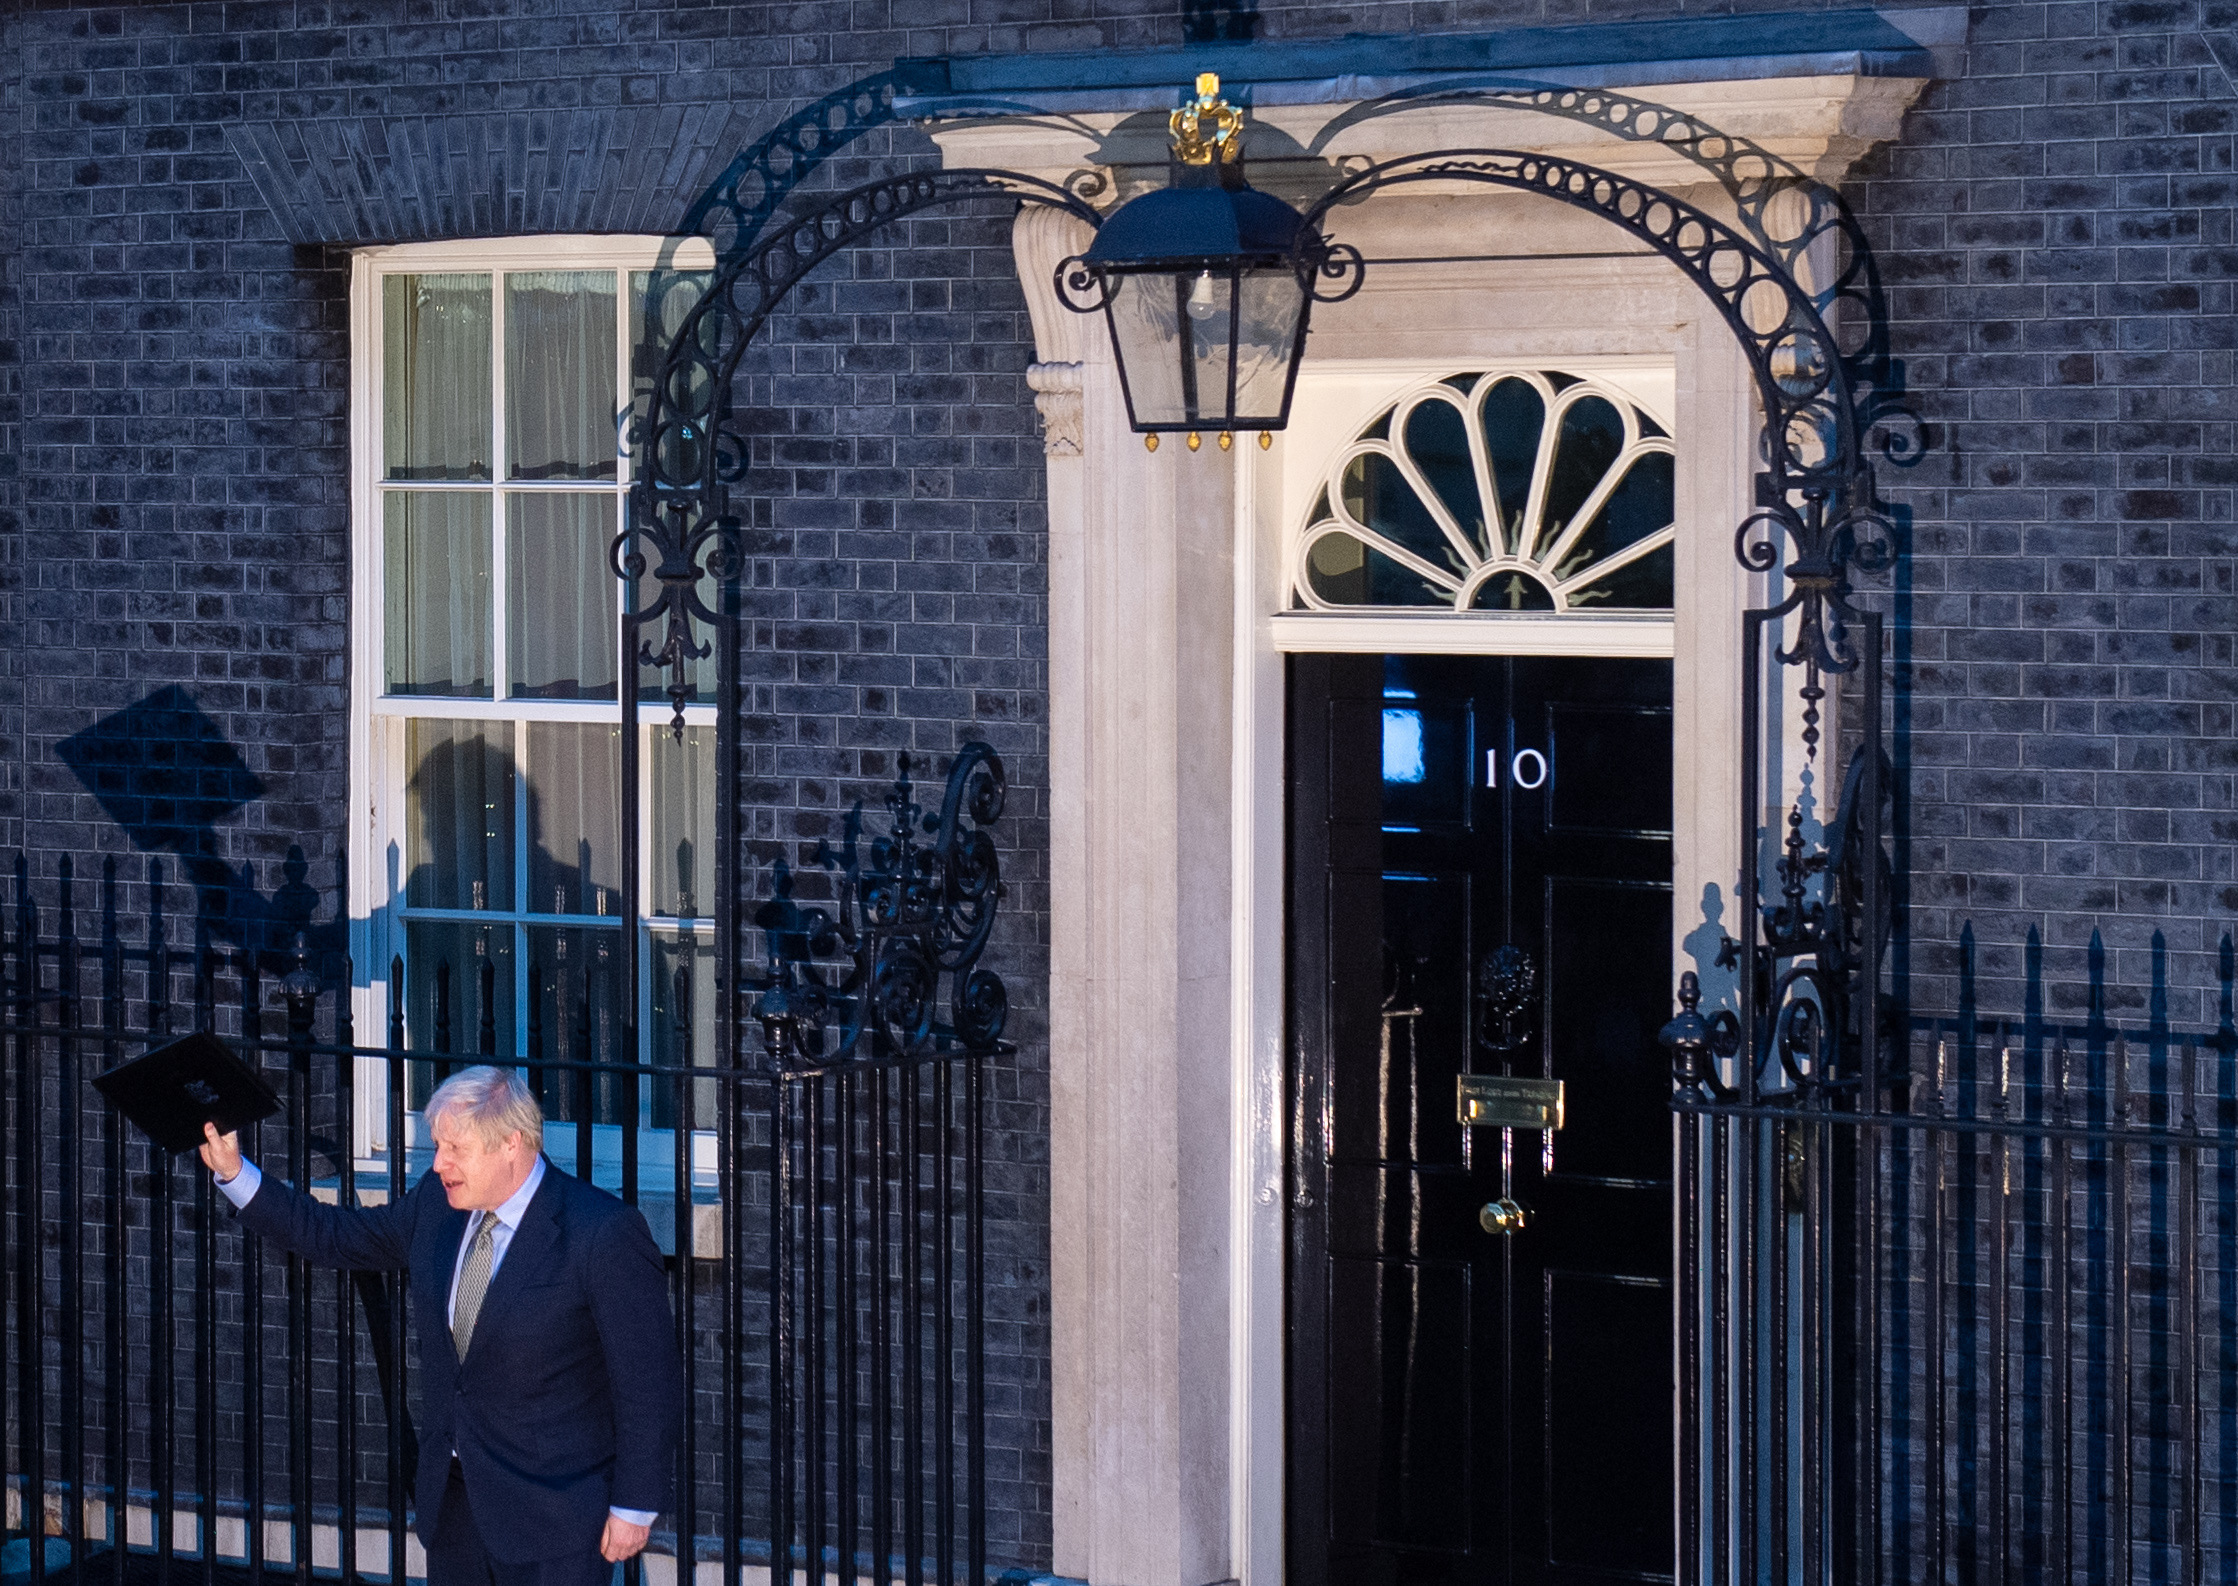 Someone has listed No 10 Downing Street as ‘great social space’ on RightMove